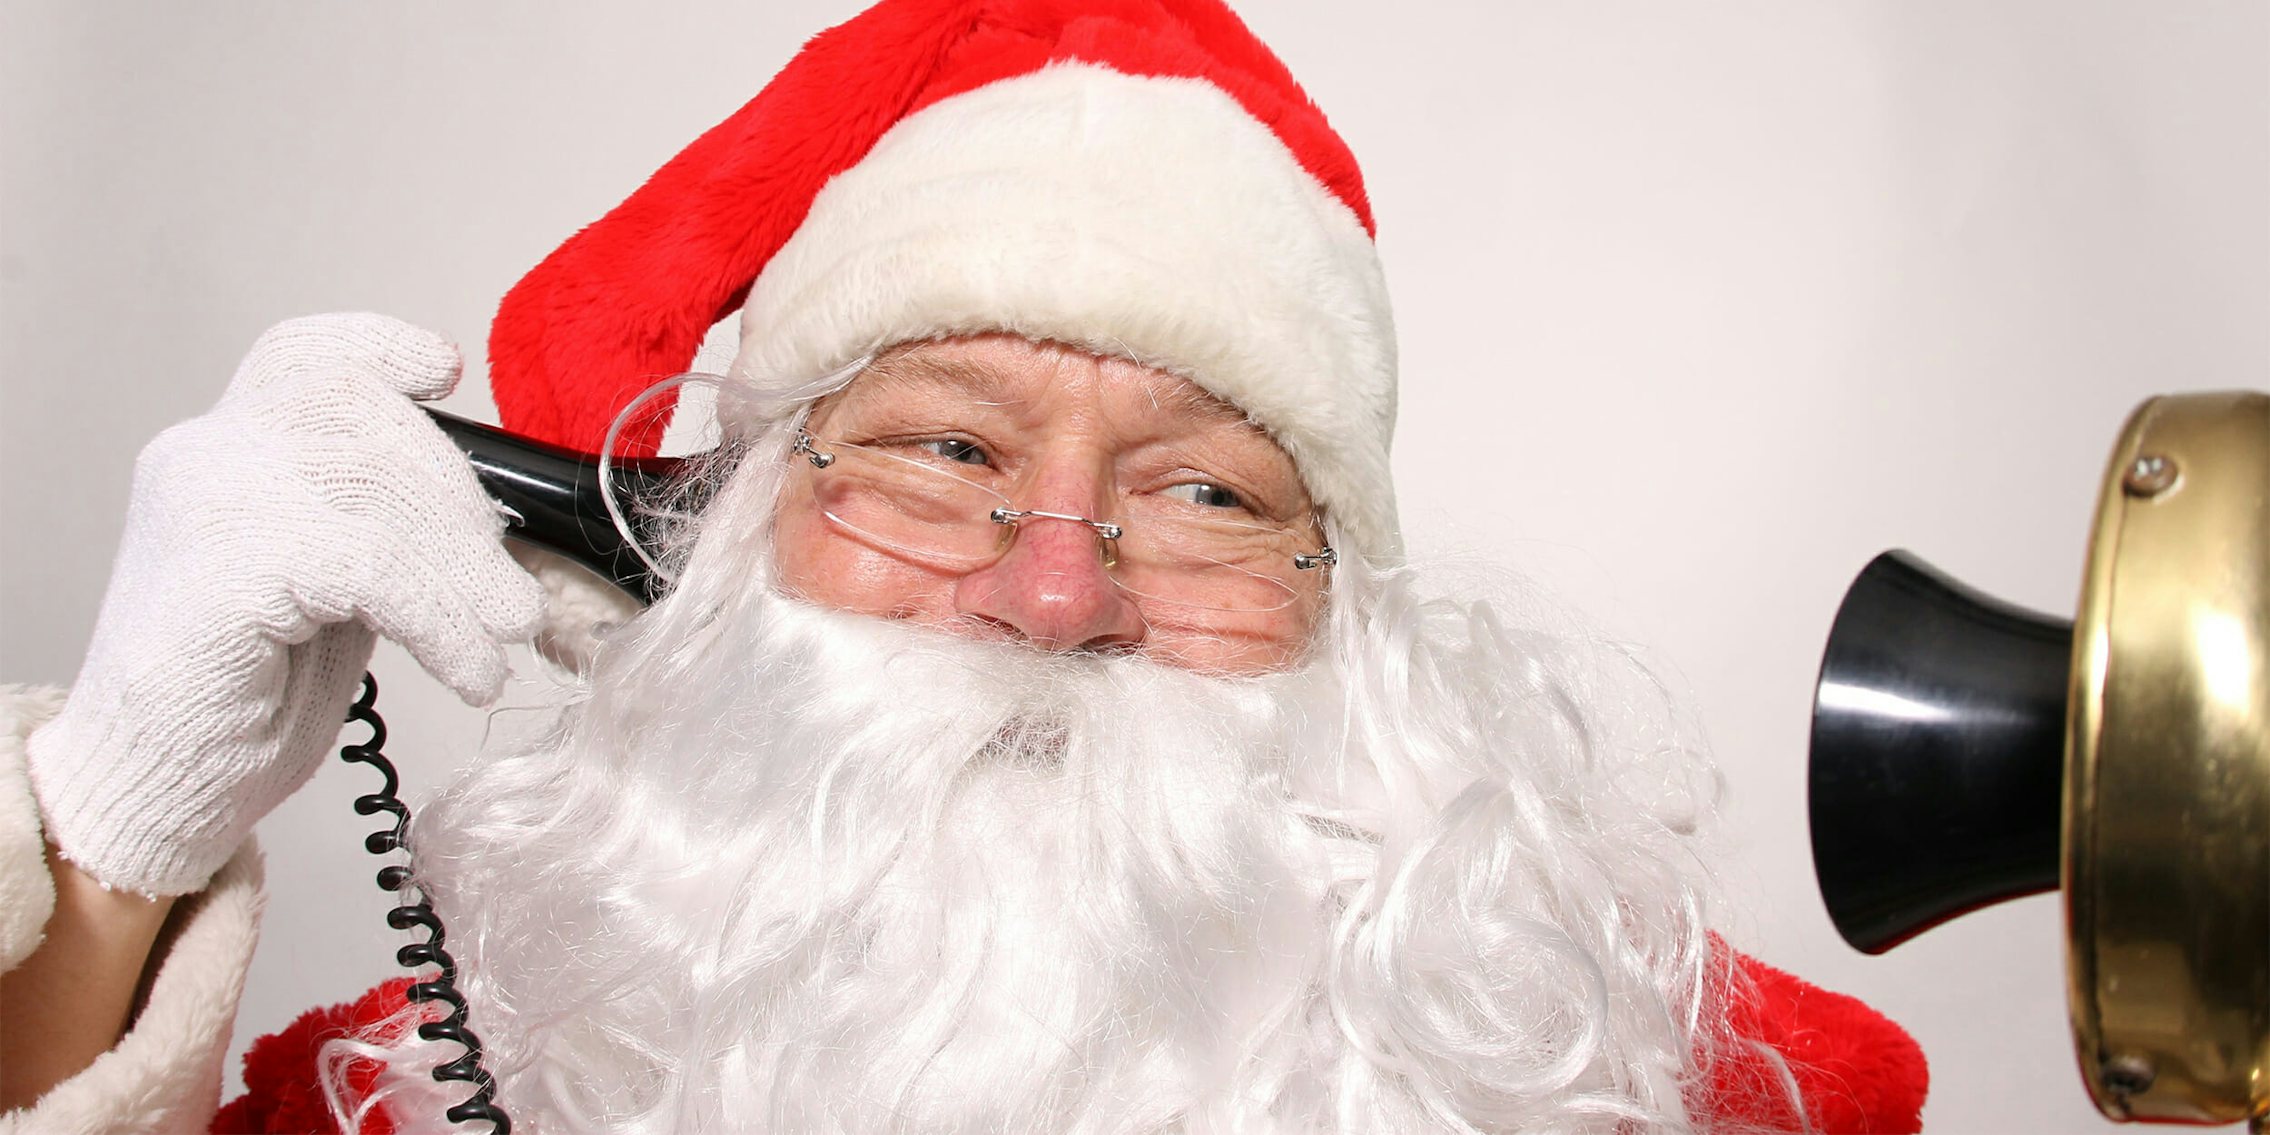 Santas phone number : Mr. Claus on old style telephone